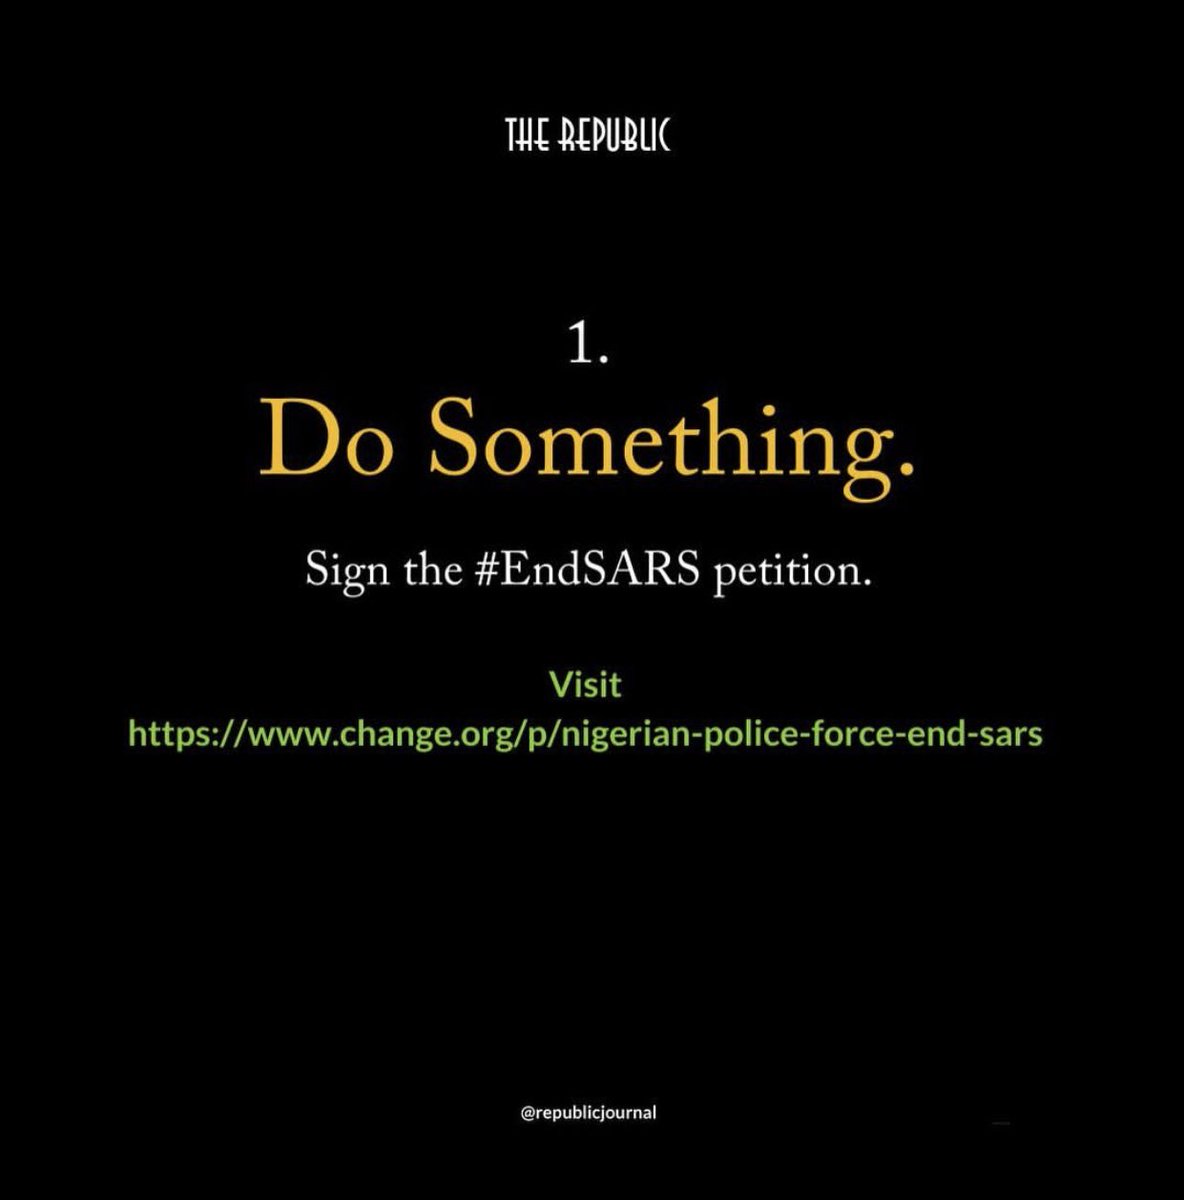 don’t just read something… do something to end police brutality in nigeria! keep supporting the movement  #ENDSARS  #EndSarsNow  #EndPoliceBrutality